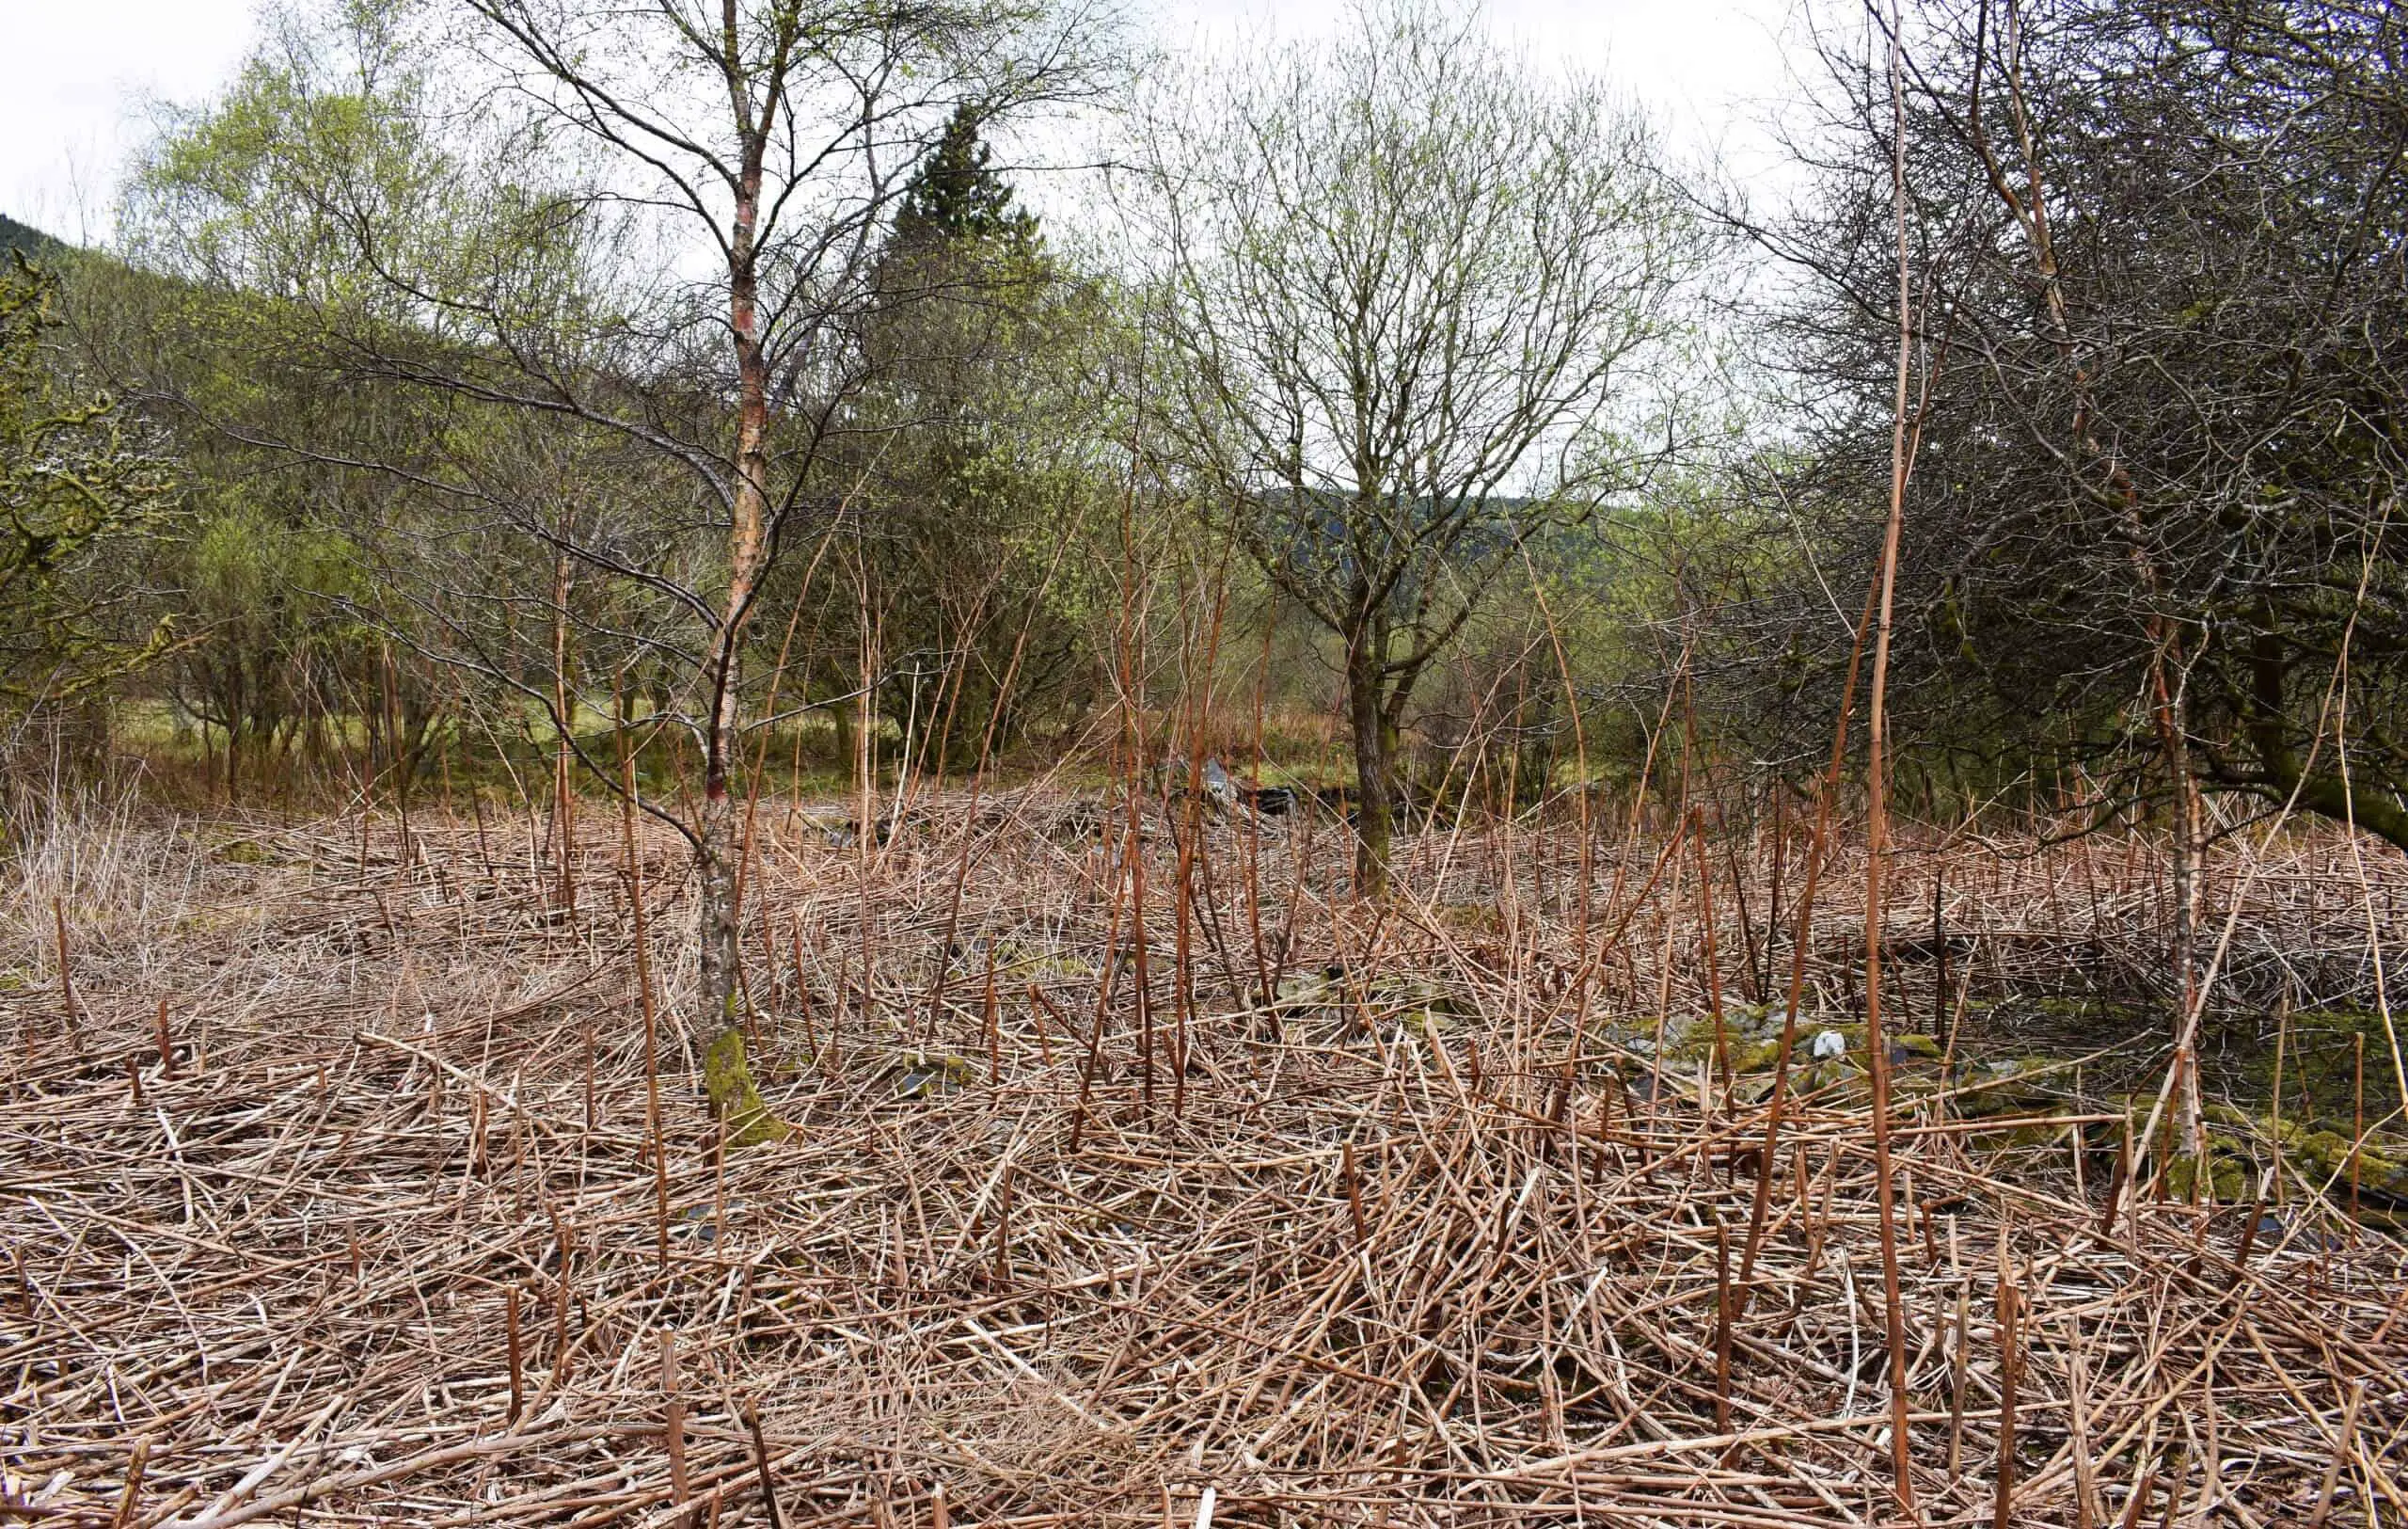 Japanese knotweed in winter dies right-back but is not dead as the rhizomes stay alive for years